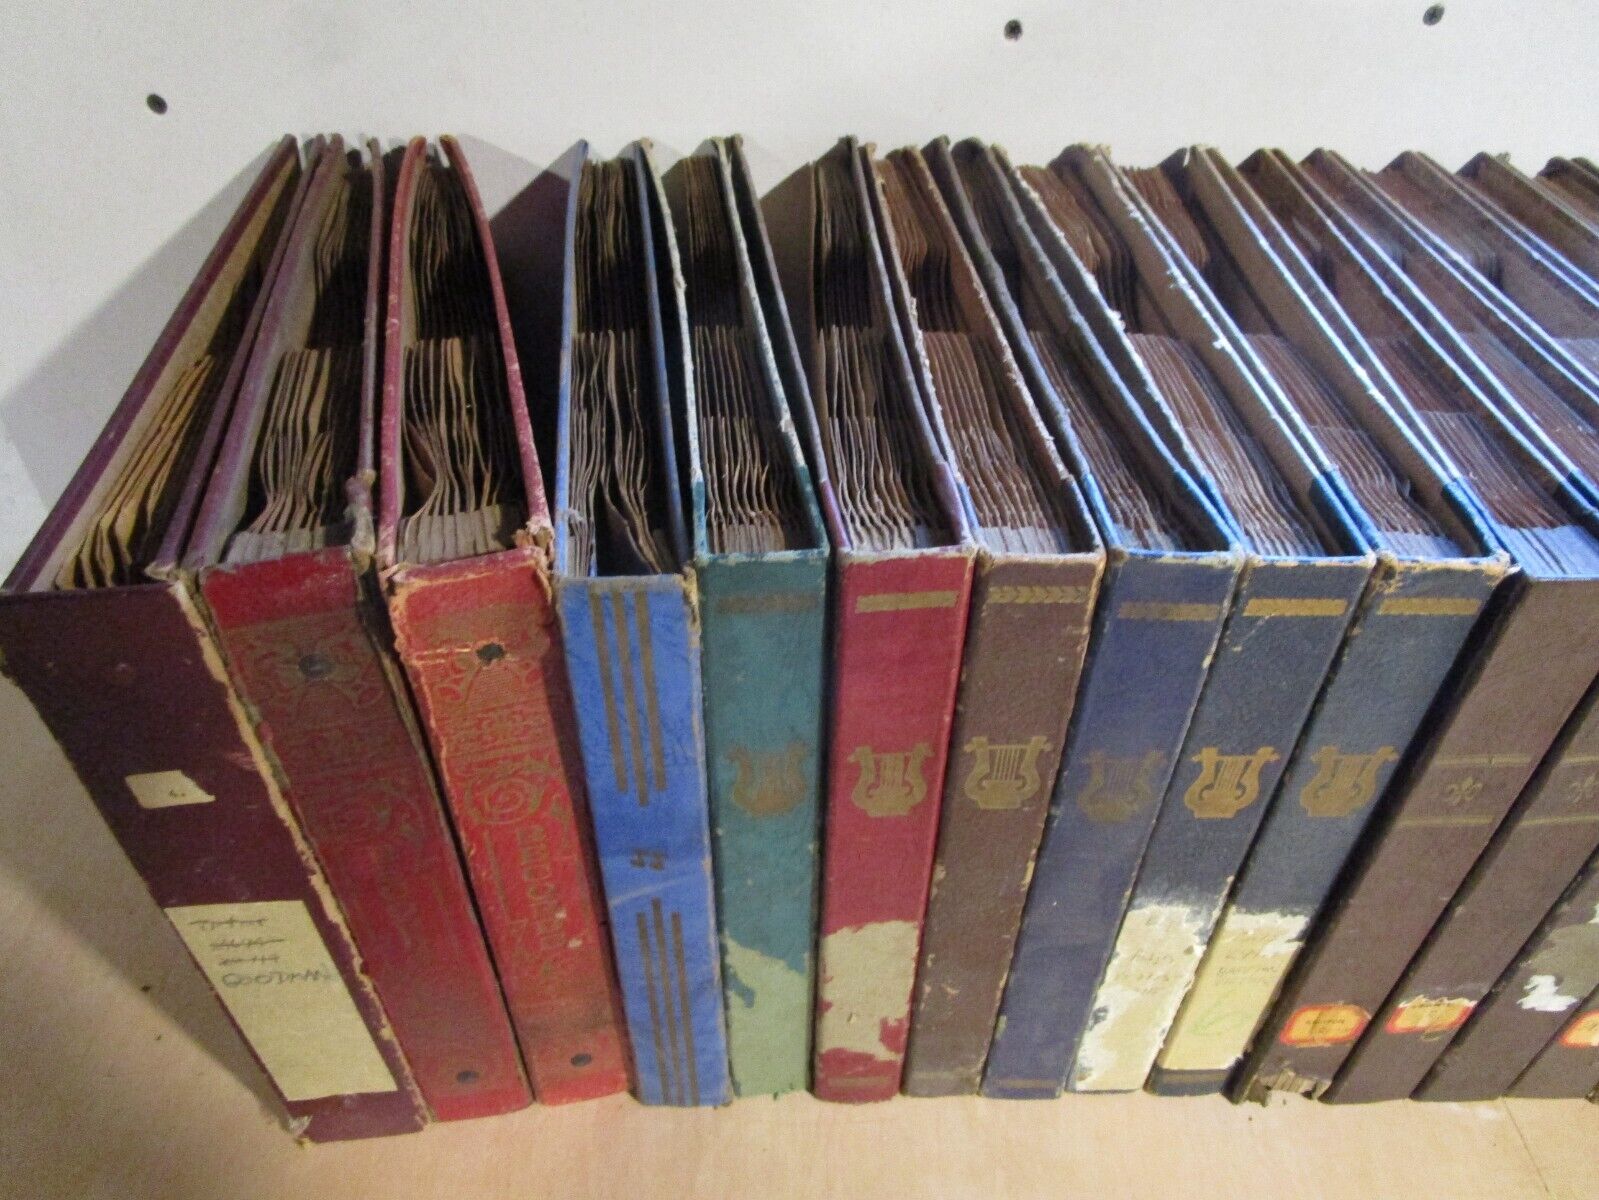 78 RPM 10 inch record storage album 12 sleeves, buy one or more with discount